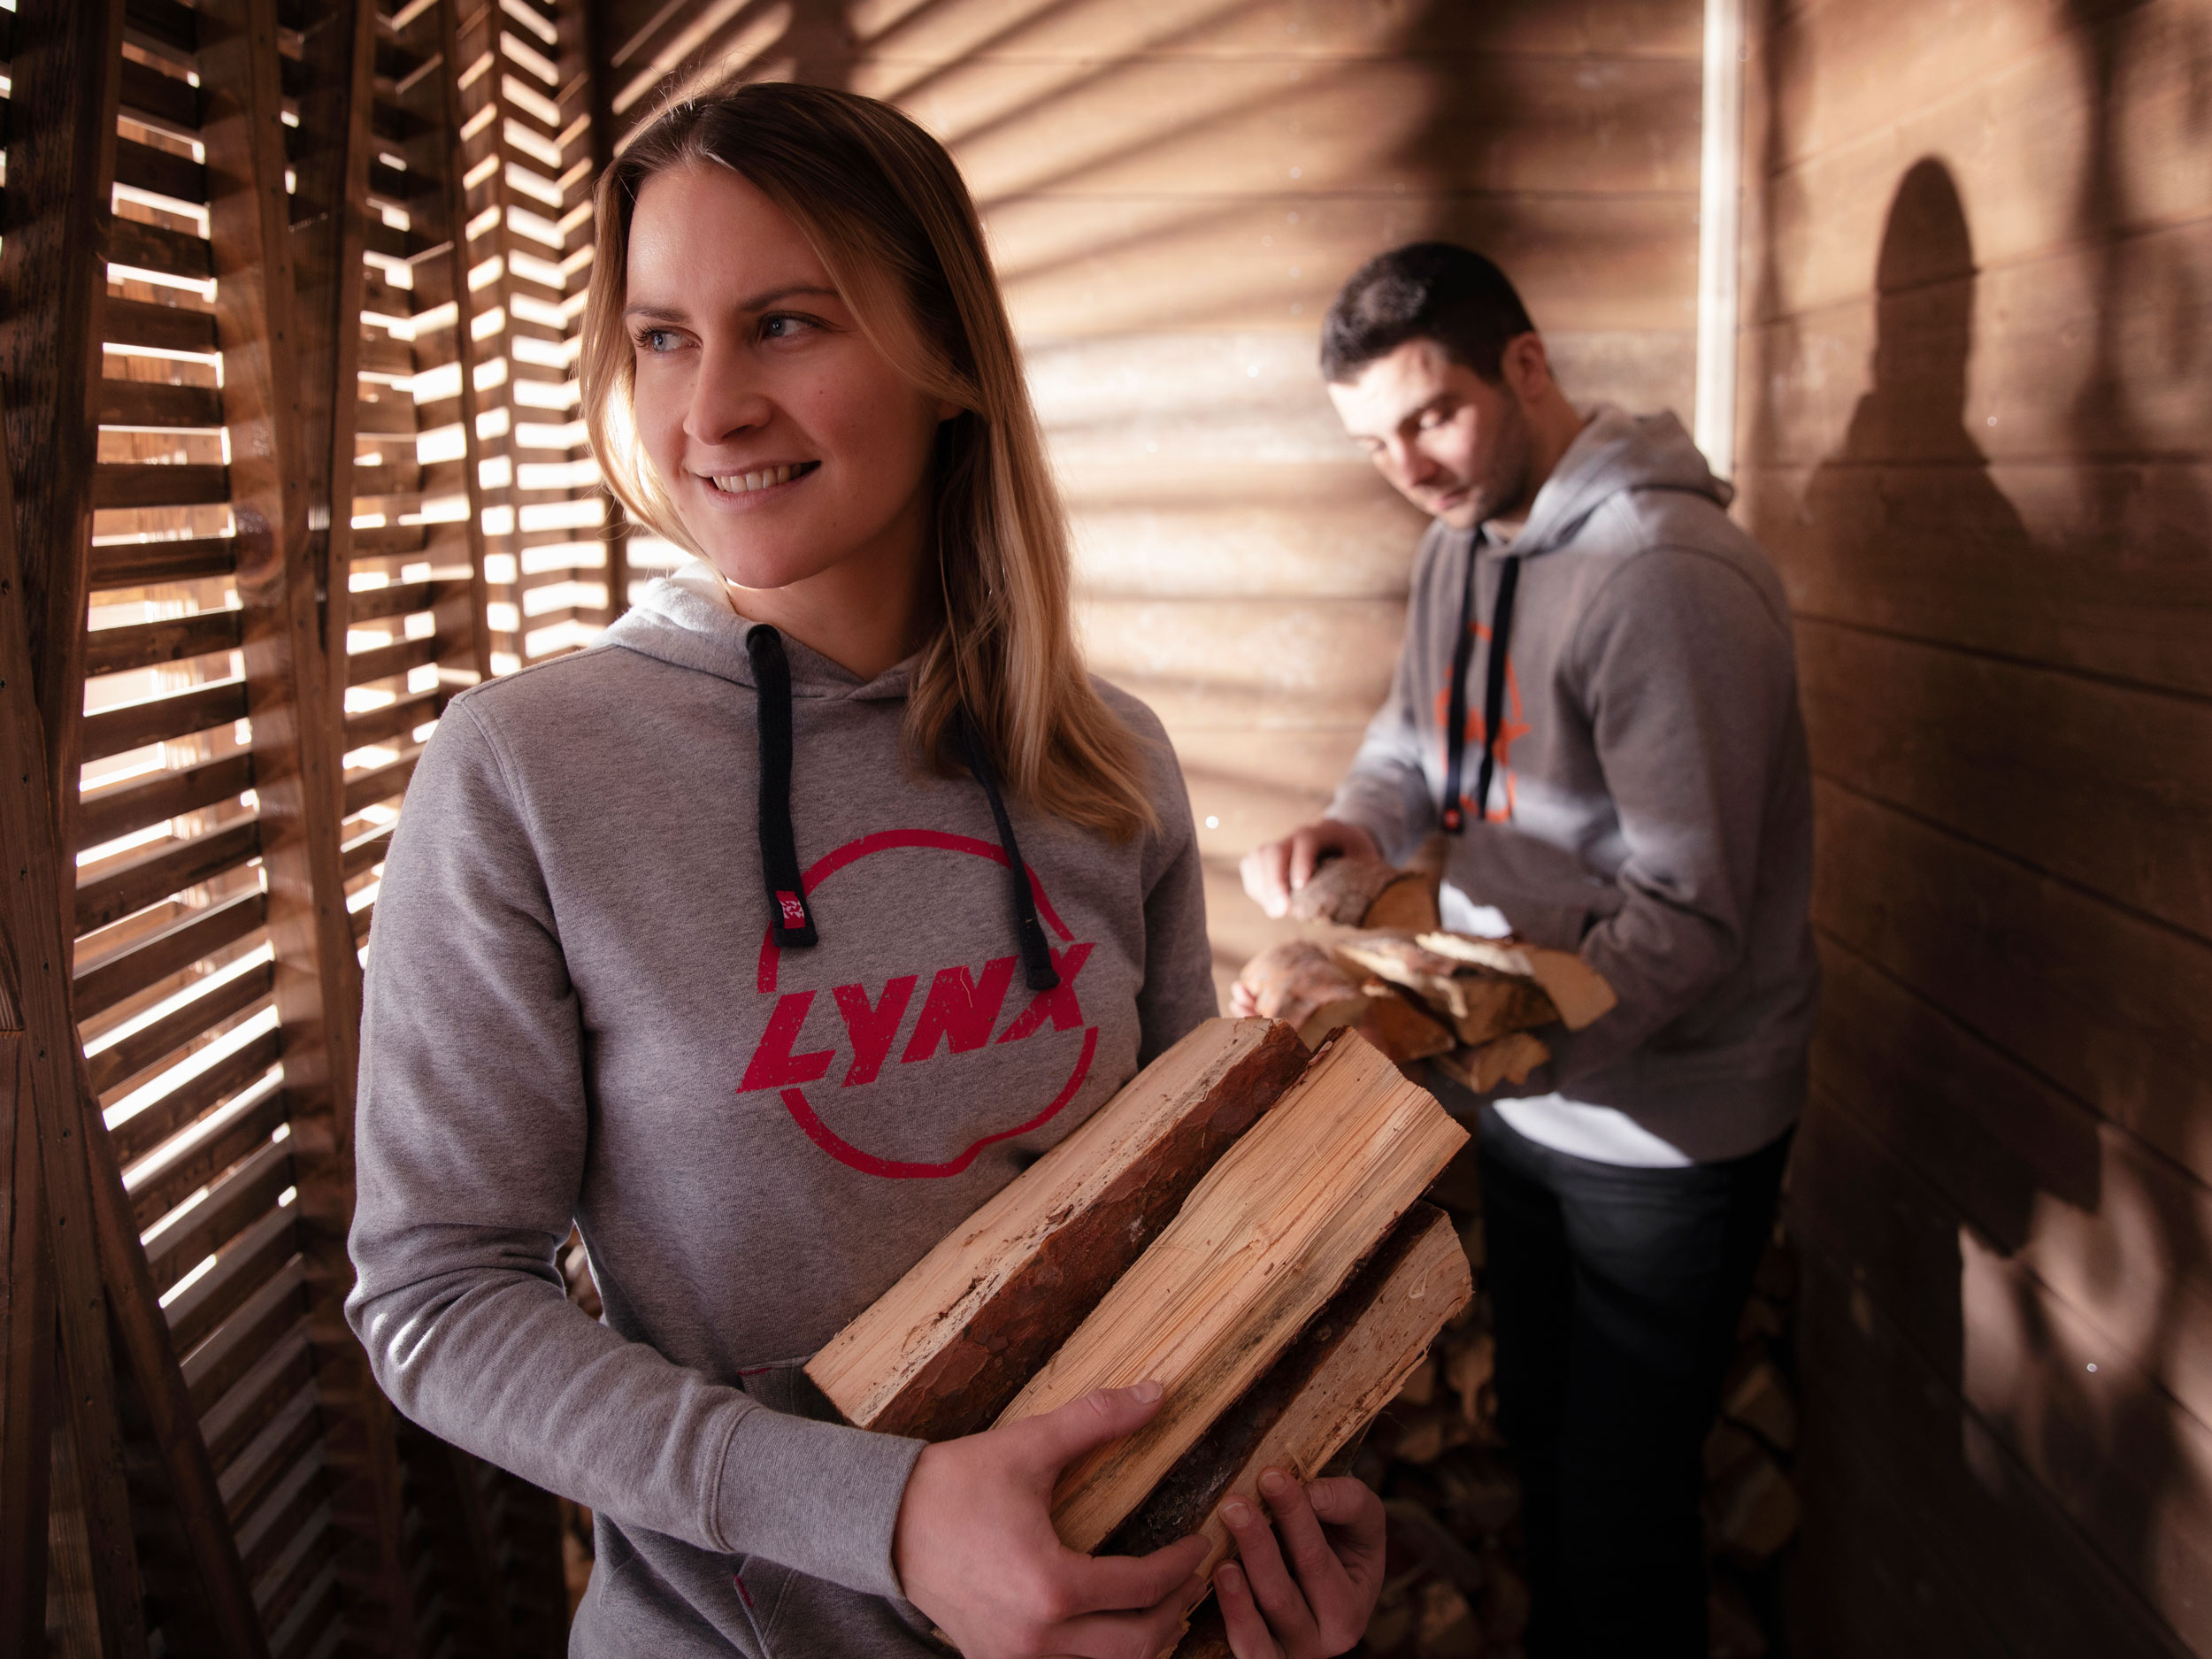 Man and woman wearing Lynx sportswear after riding and holding wood